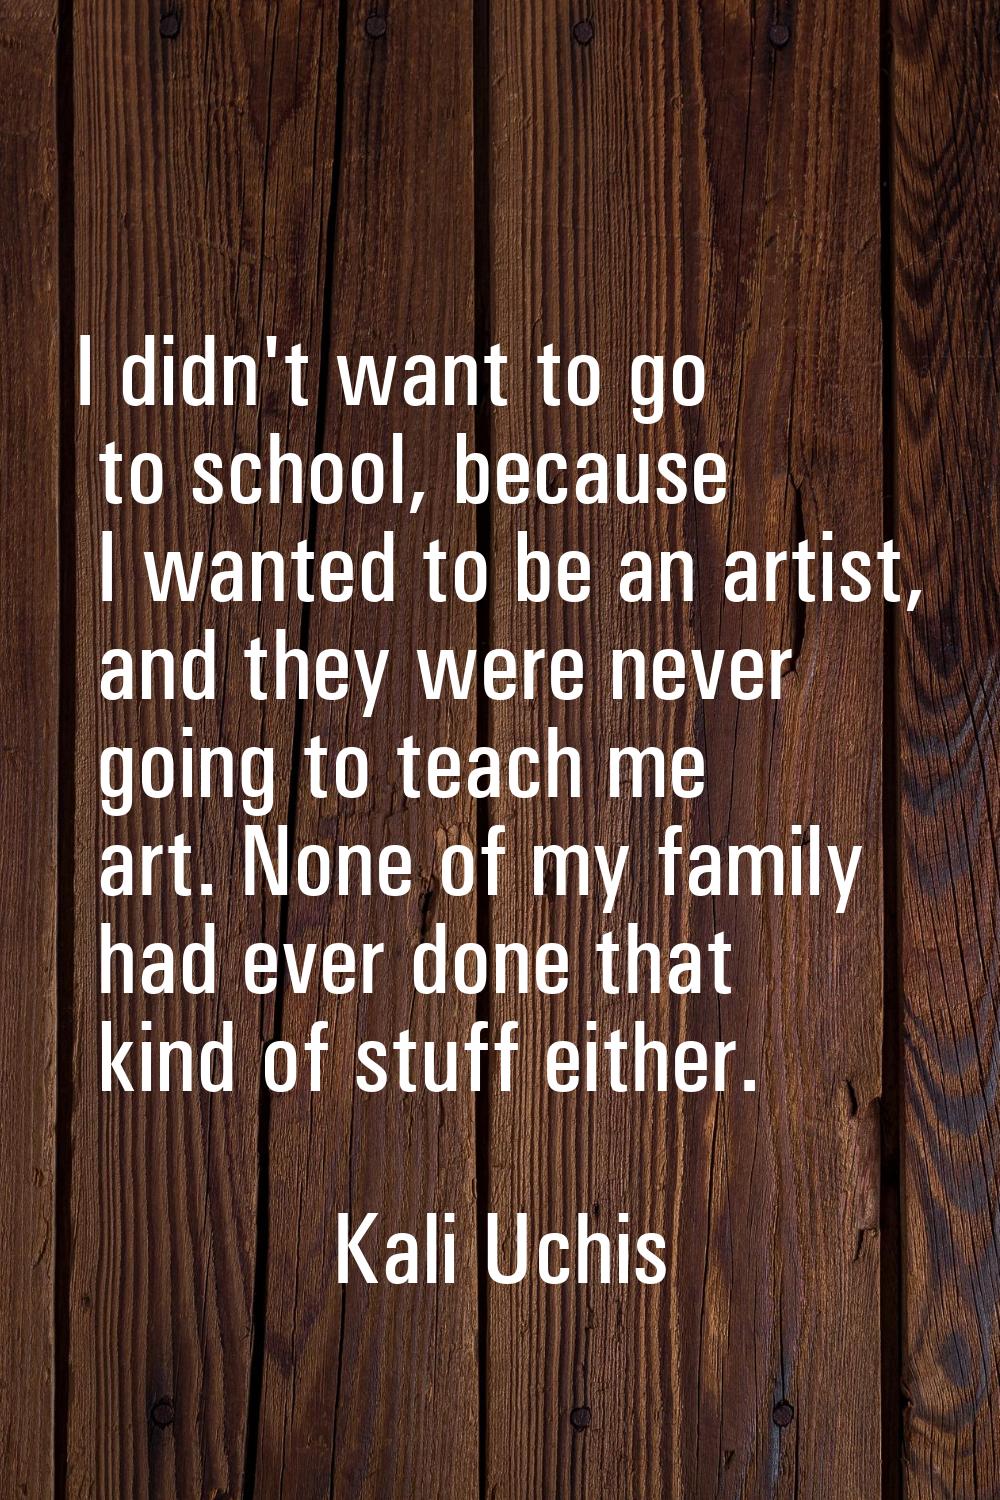 I didn't want to go to school, because I wanted to be an artist, and they were never going to teach